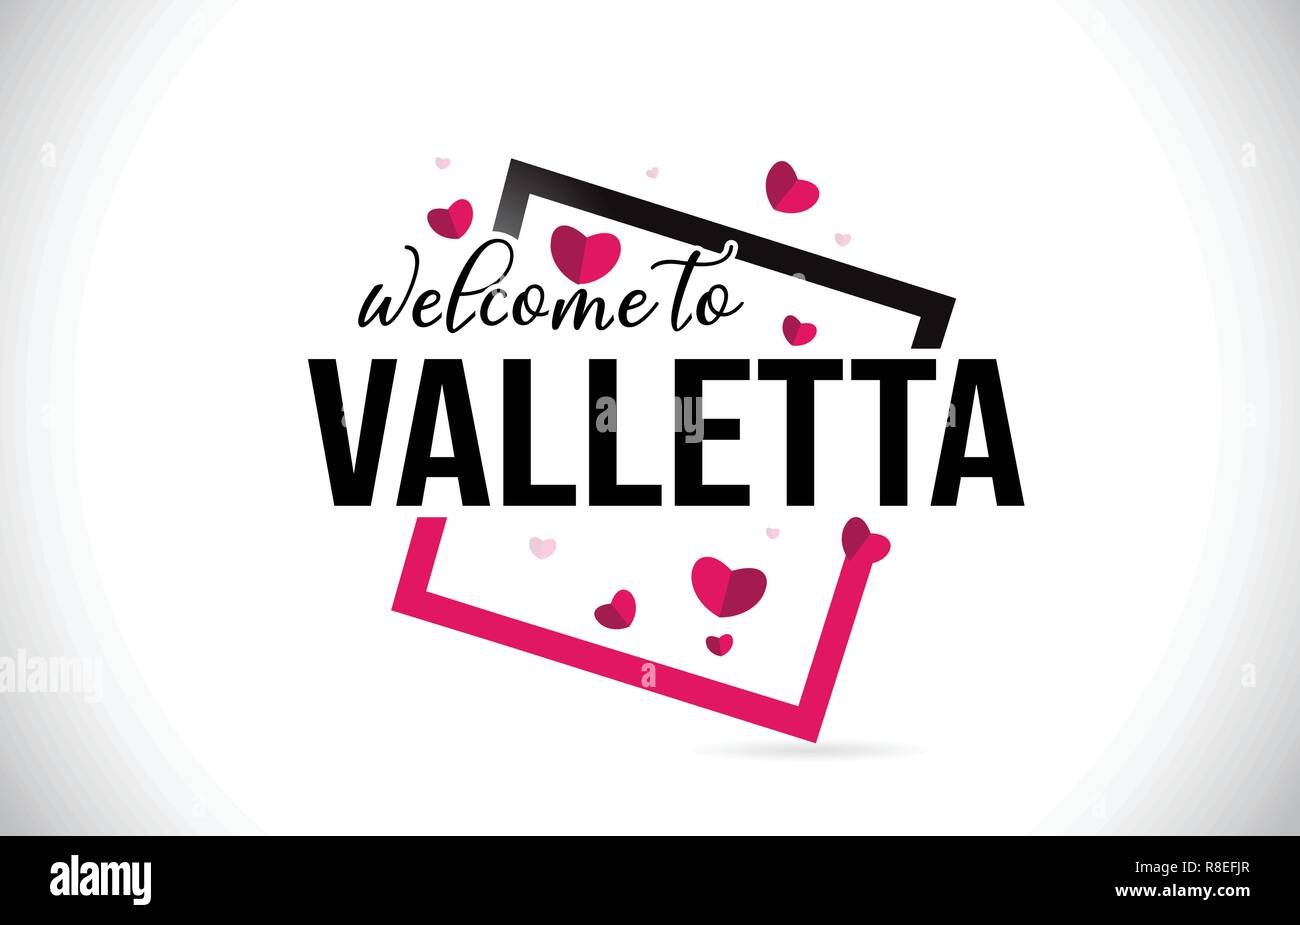 Valletta Welcome To Word Text with Handwritten Font and  Red Hearts Square Design Illustration Vector. Stock Vector